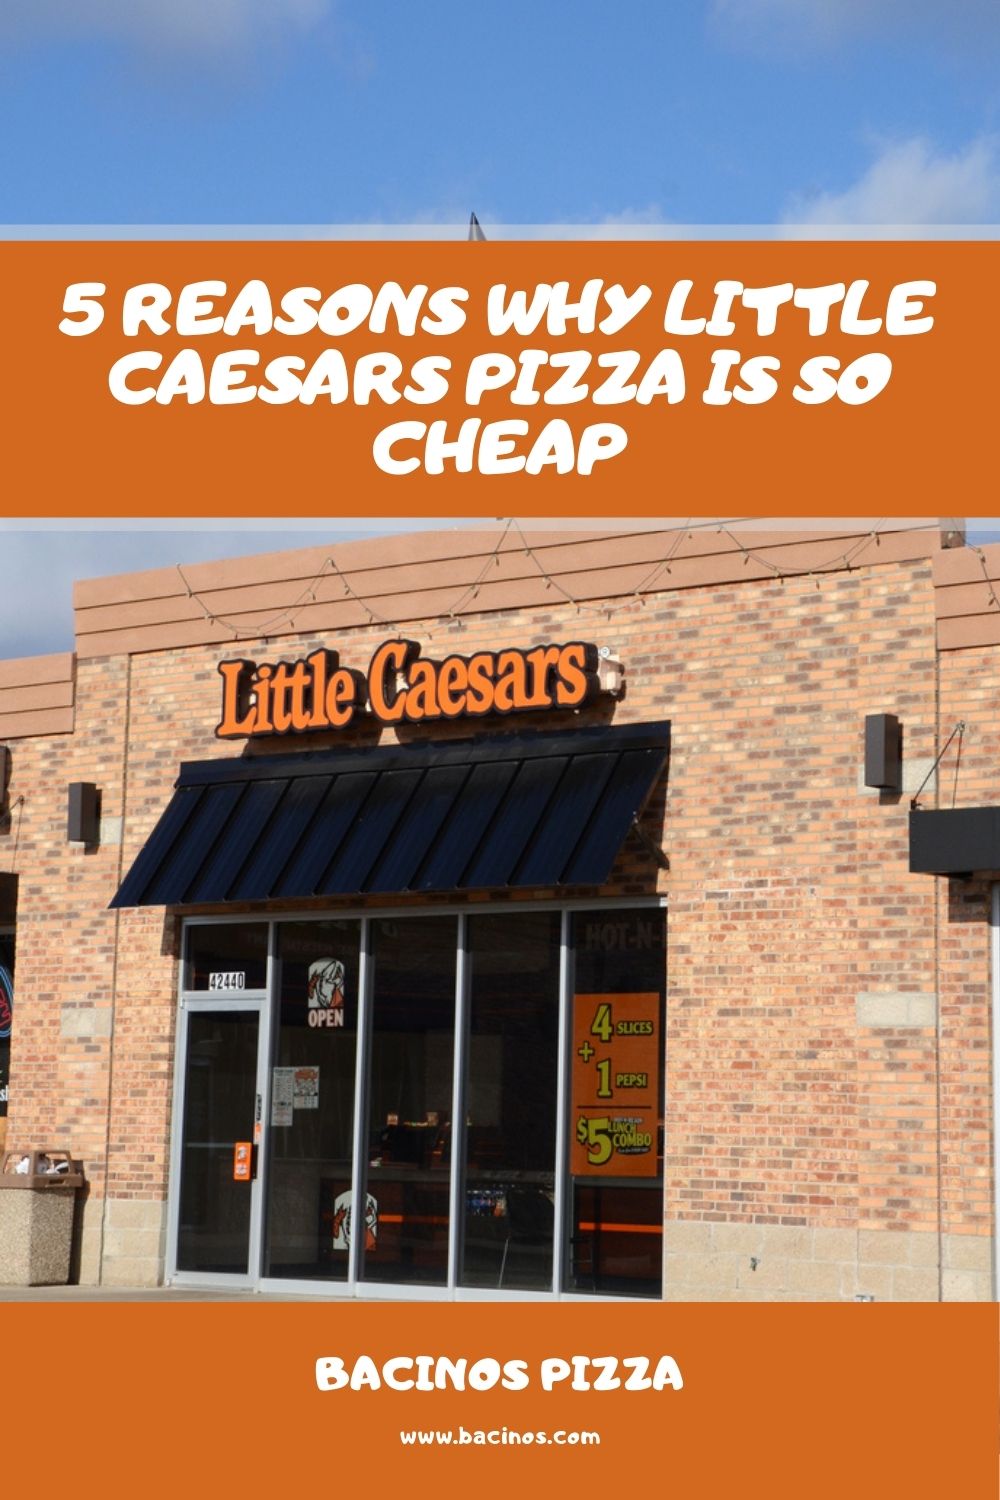 5 Reasons Why Little Caesars Pizza is So Cheap